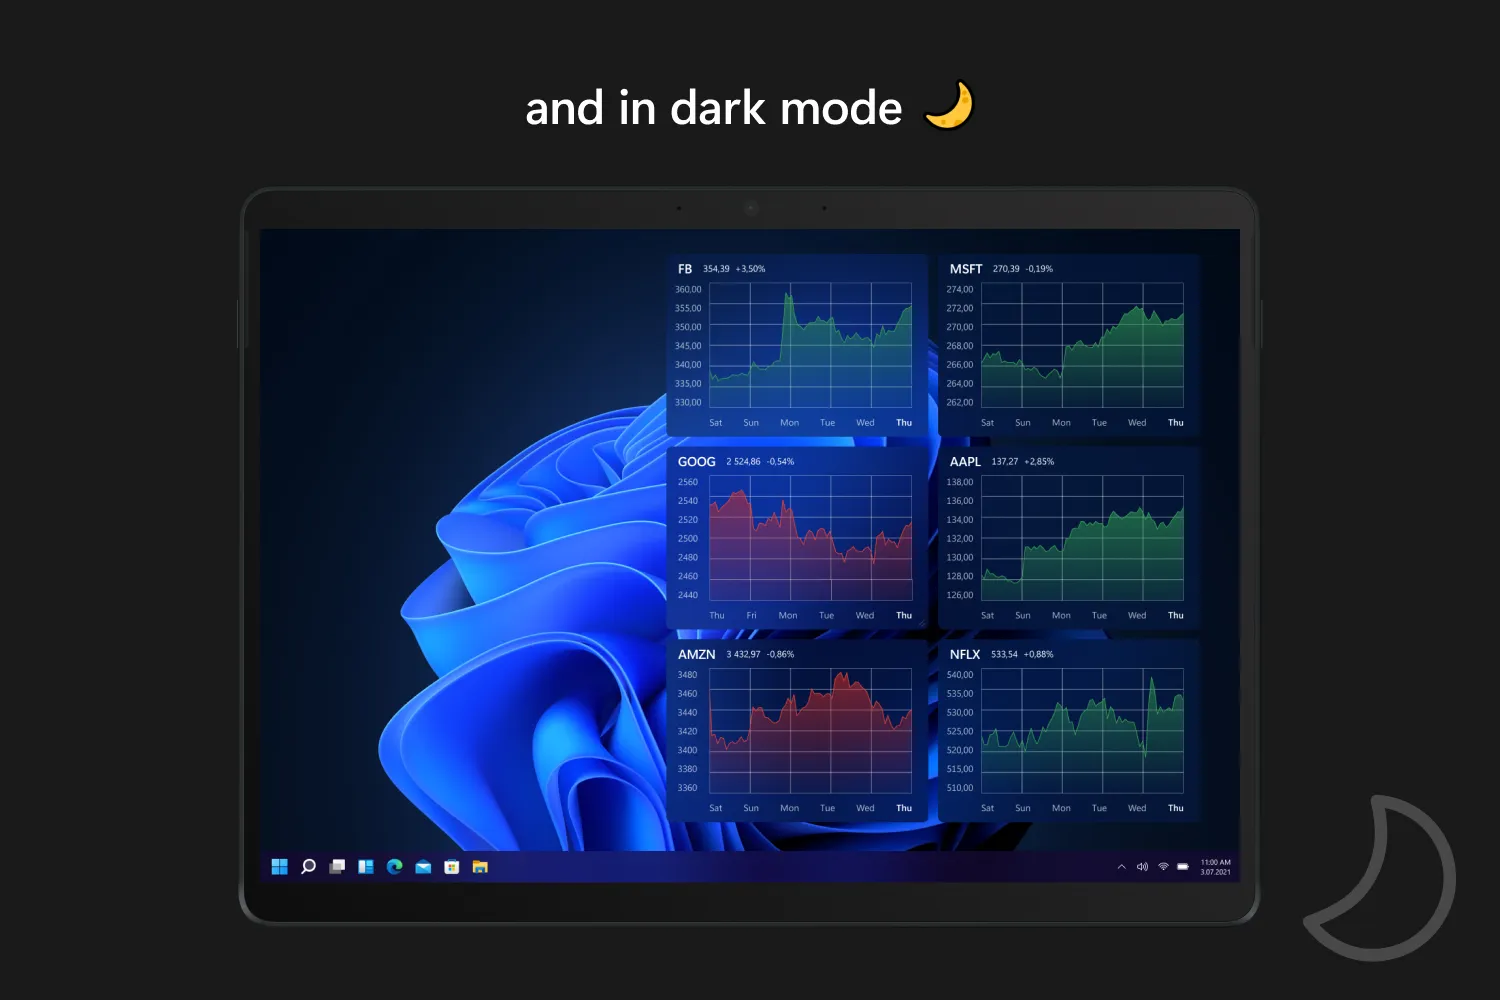 And in dark mode